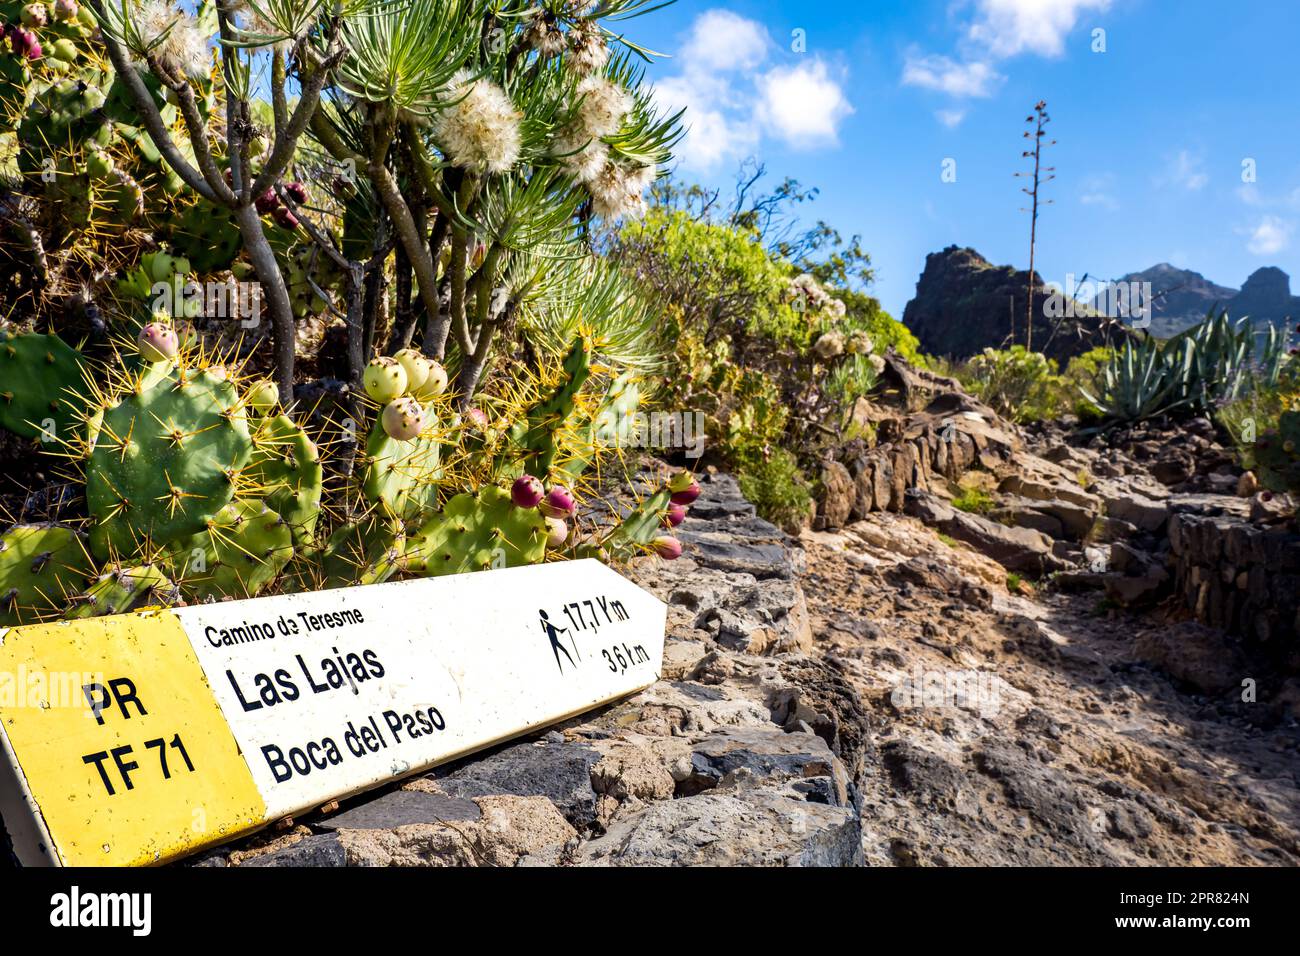 Hiking through Tenerife's rugged terrain on Camino de Teresme PR-TF 71 trail, a guidepost points towards the Boca del Paso and Las Lajas hiking areas. Stock Photo